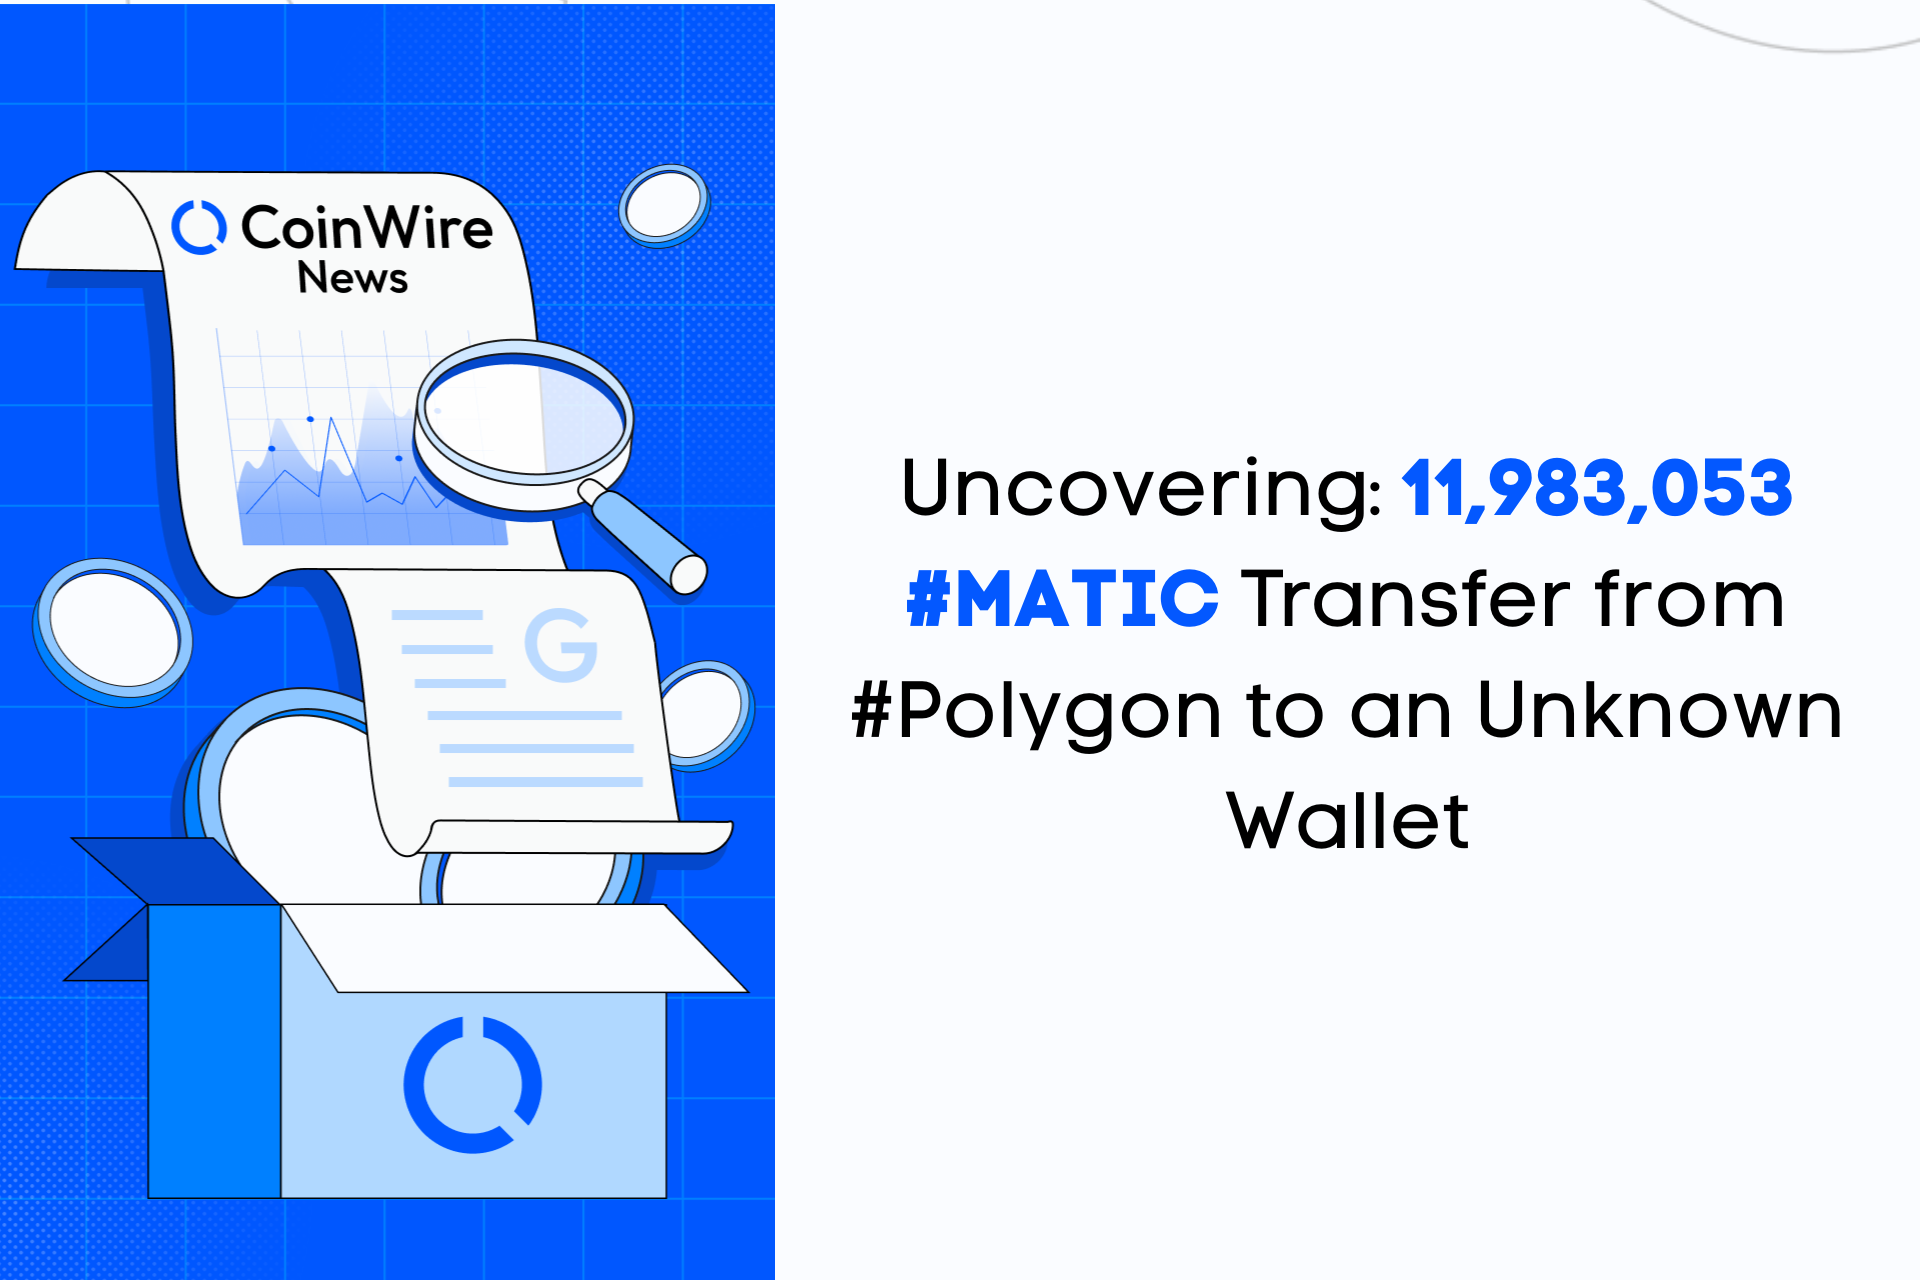 Uncovering: 11,983,053 #Matic Transfer From #Polygon To An Unknown Wallet